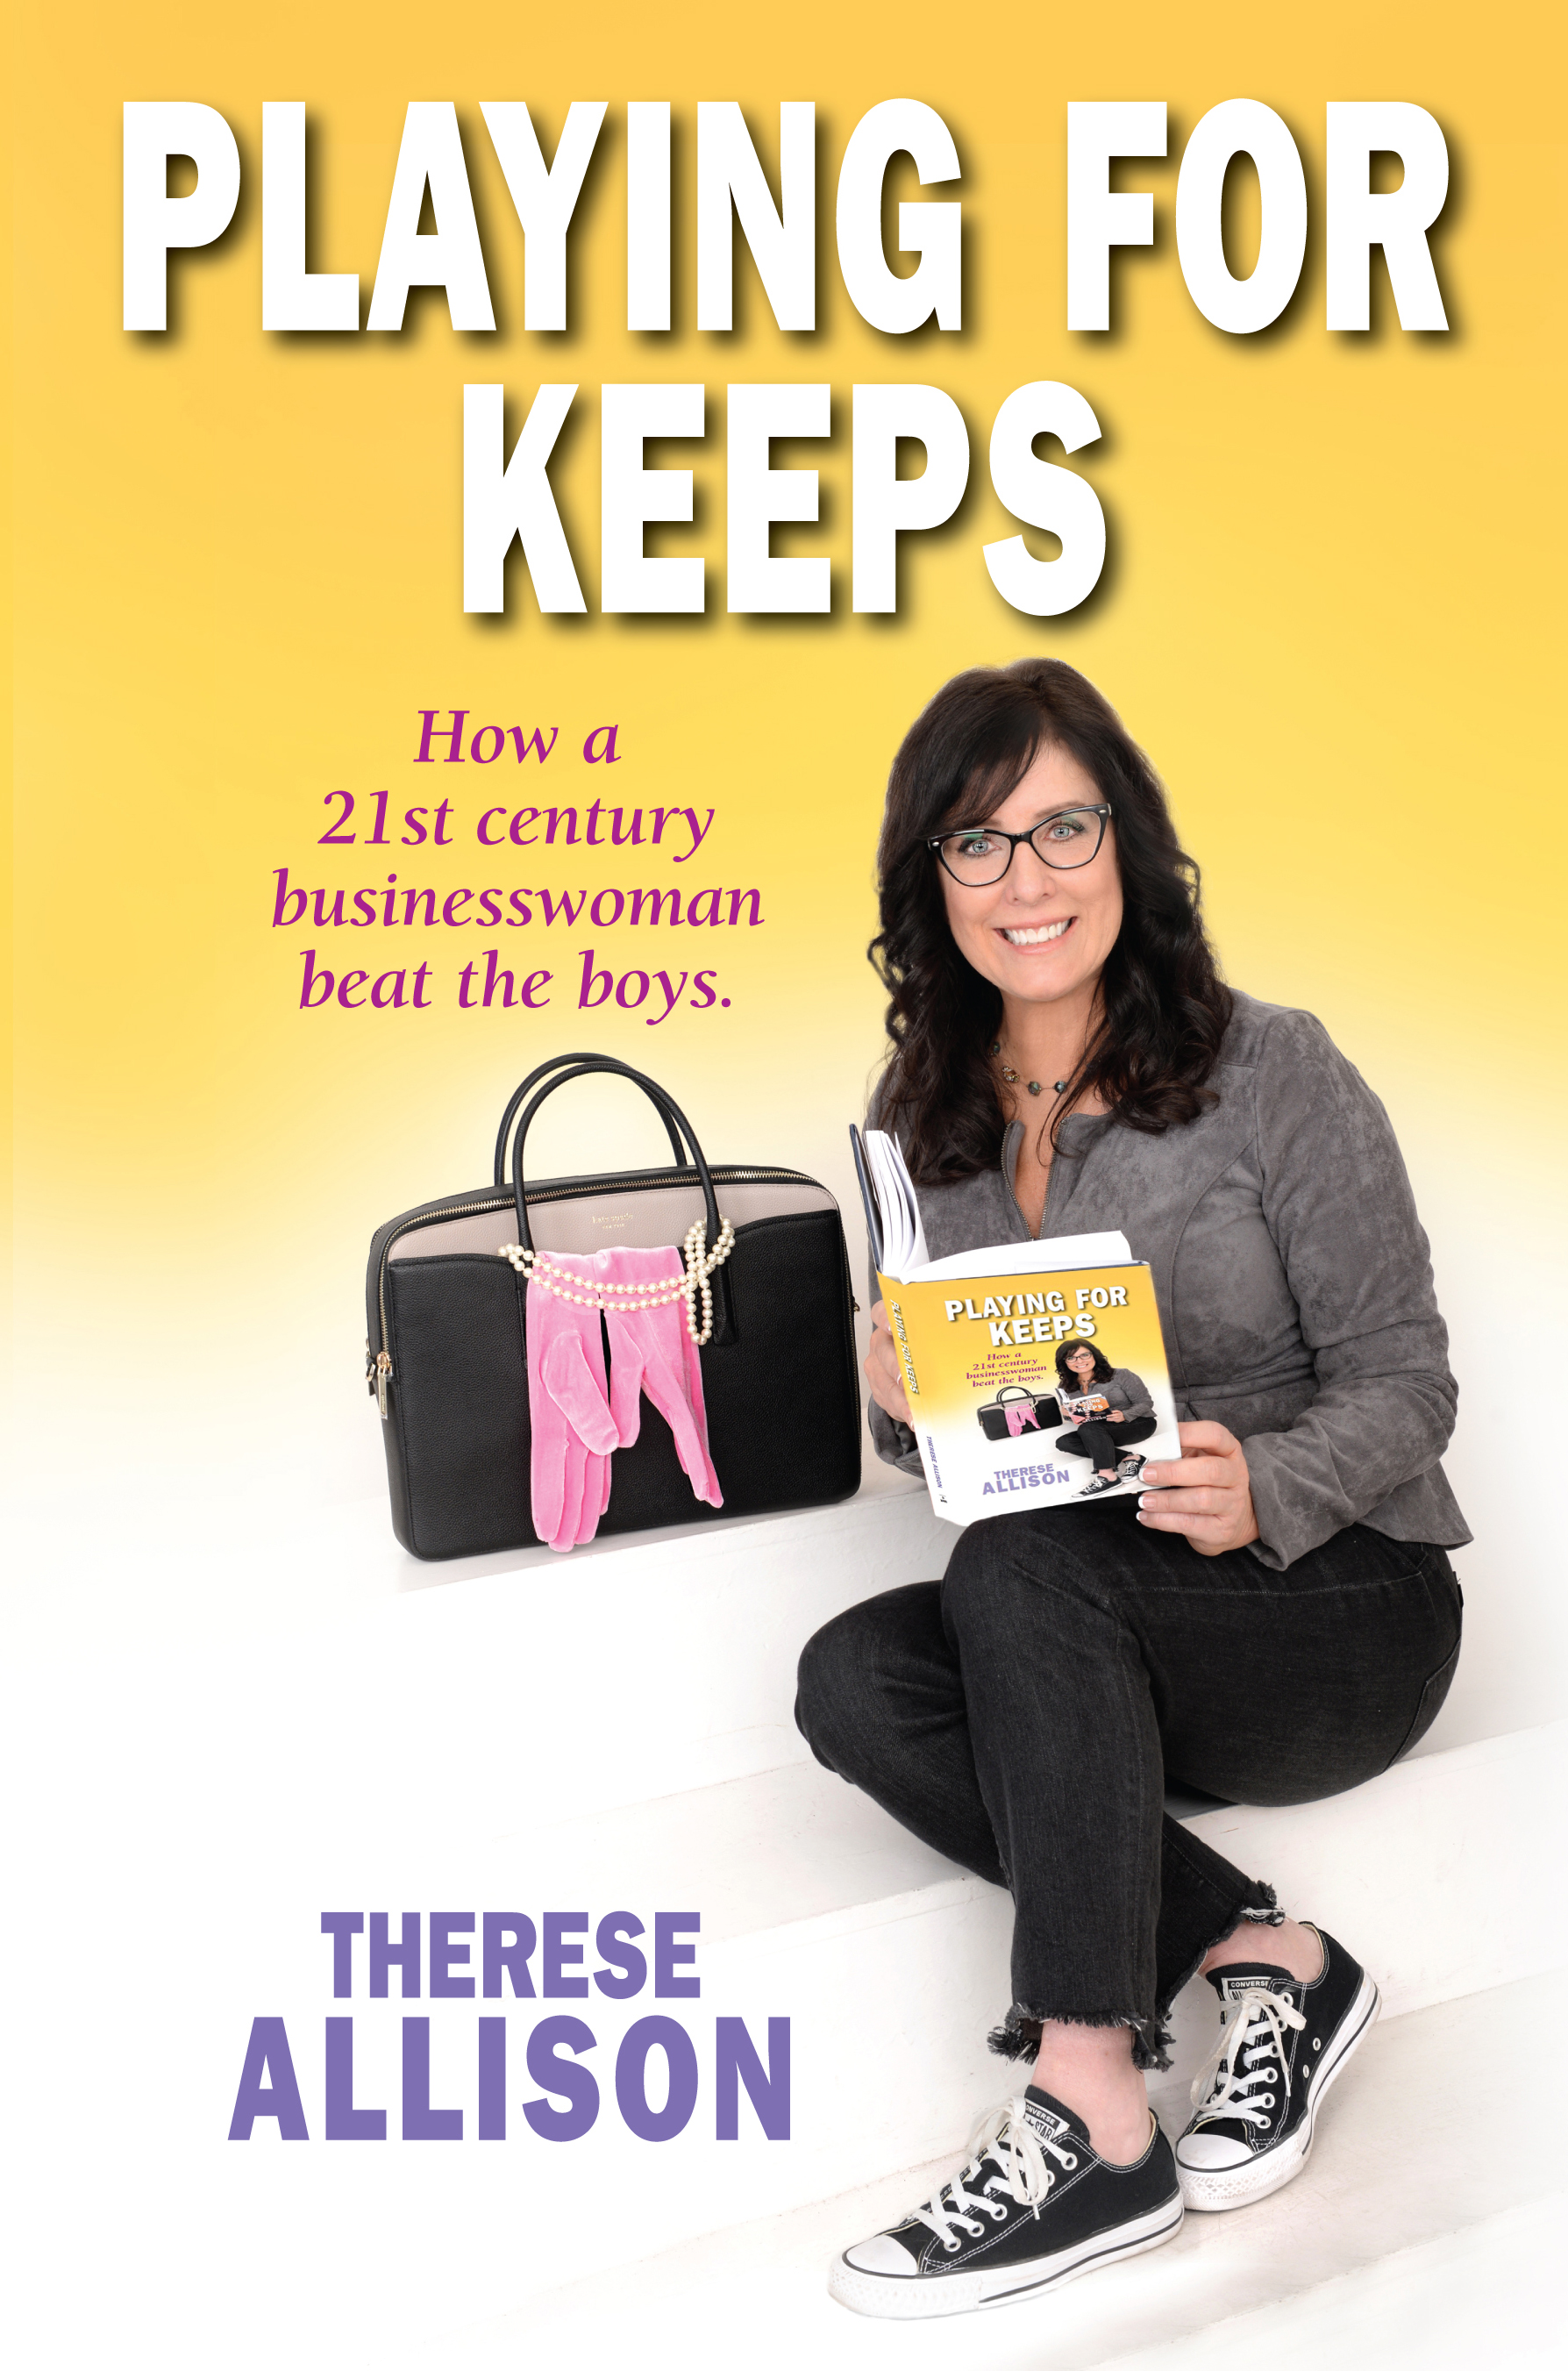 Author Therese Allison announces a new book cover for her self-help memoir, “Playing for Keeps – How a 21st century businesswoman beat the boys” in April 2021